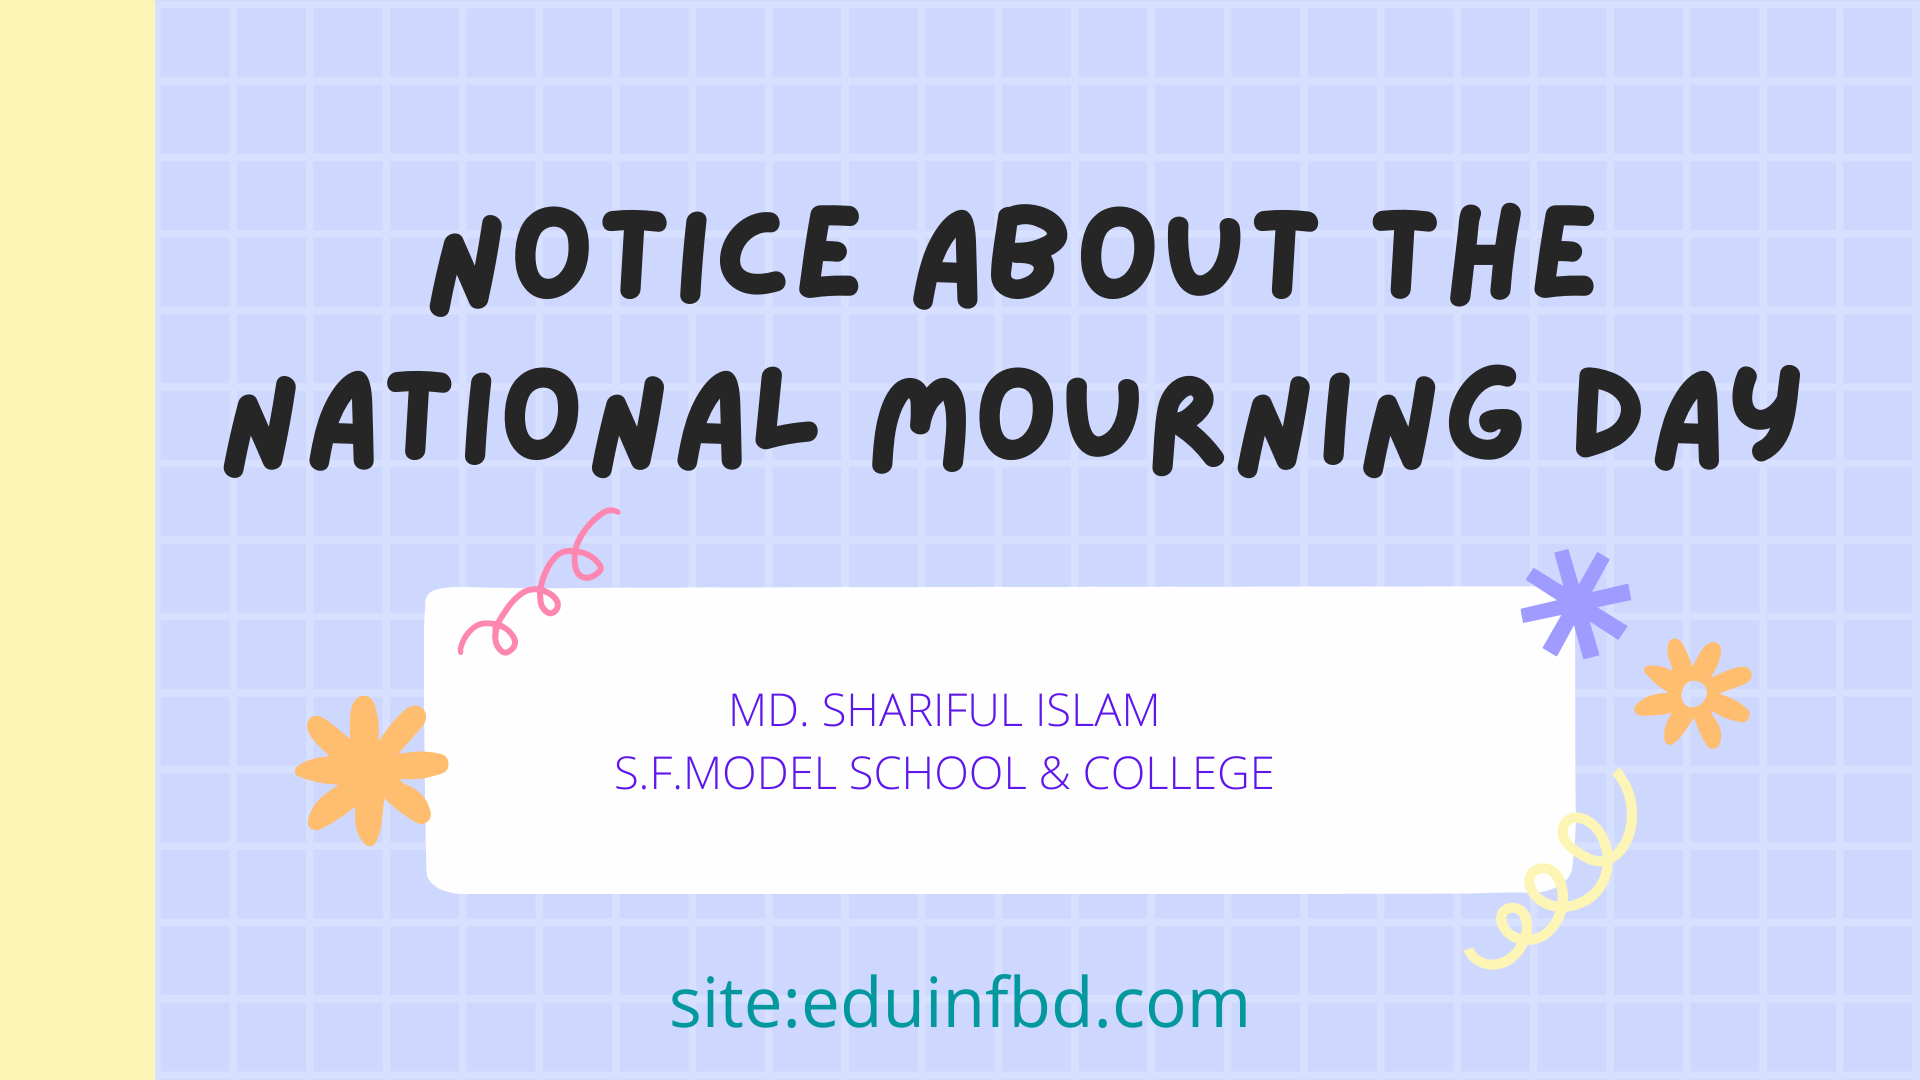 Notice about The National Mourning Day